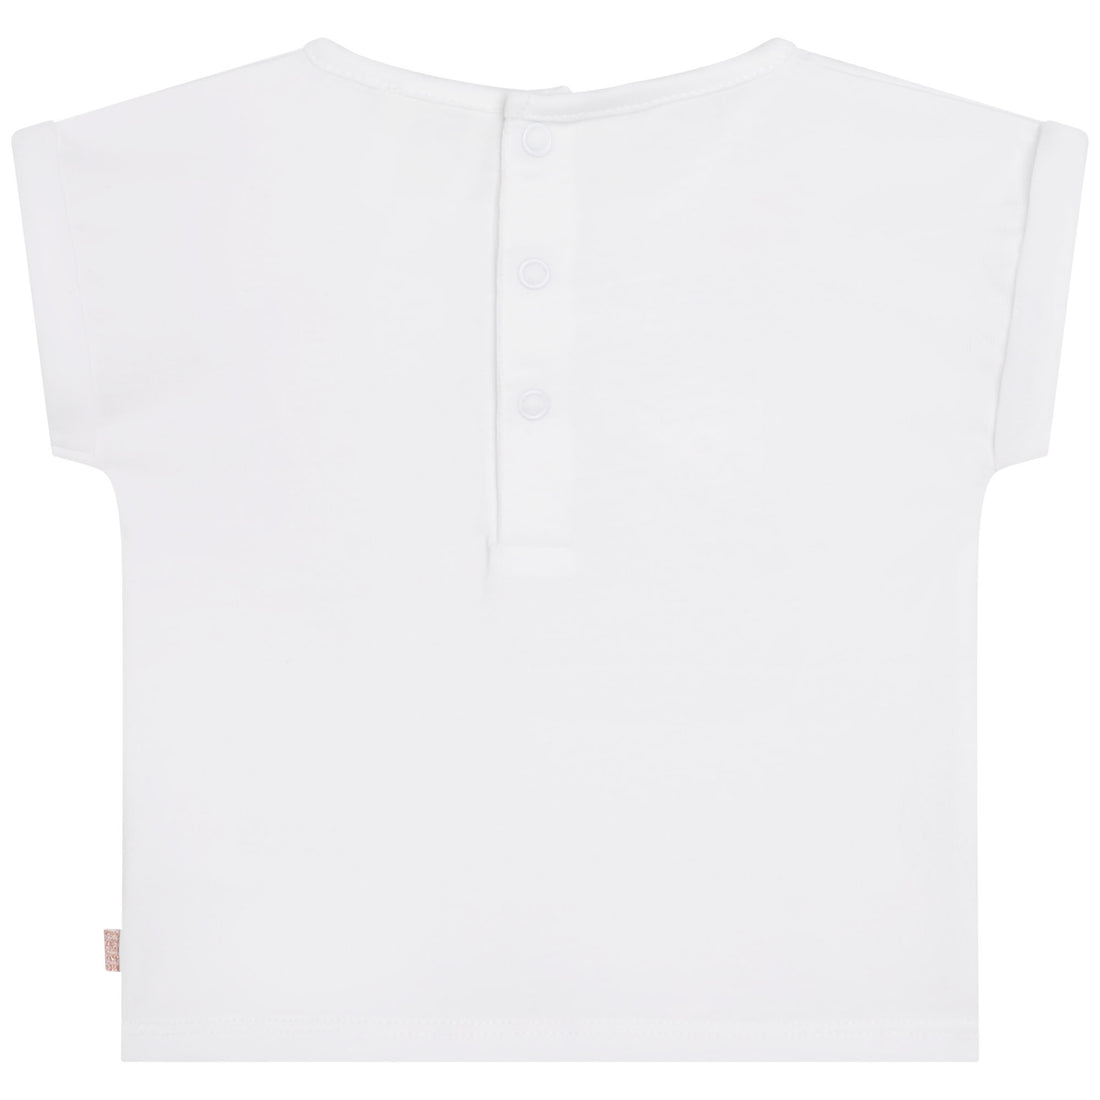 carrement-beau-short-sleeves-t-shirt-white-carr-ss23y05252-white-6m